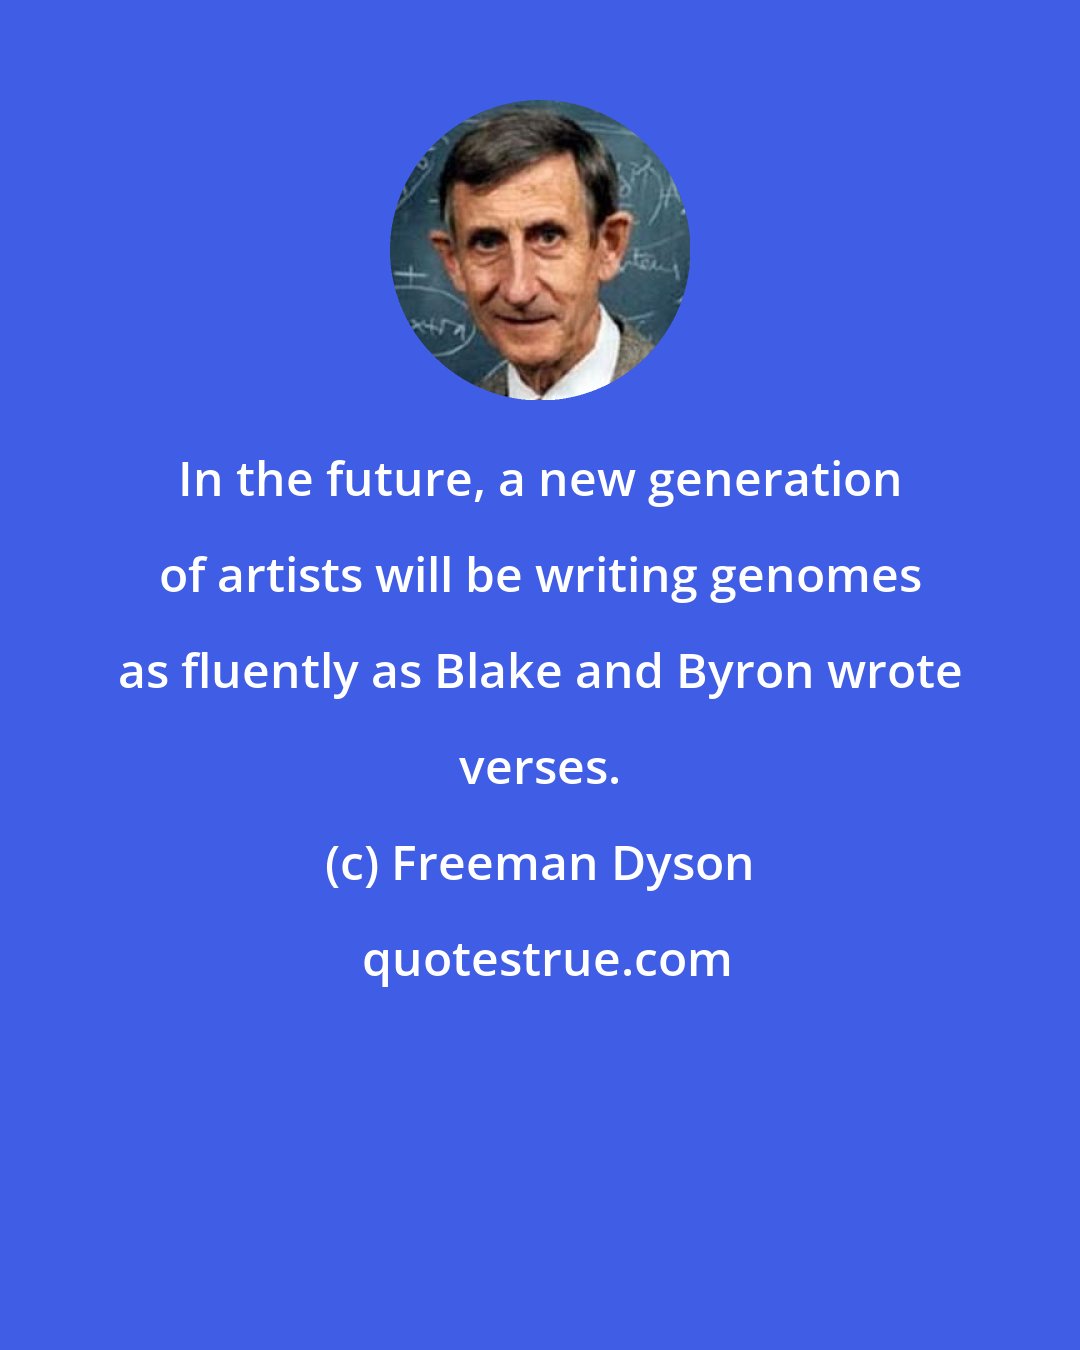 Freeman Dyson: In the future, a new generation of artists will be writing genomes as fluently as Blake and Byron wrote verses.